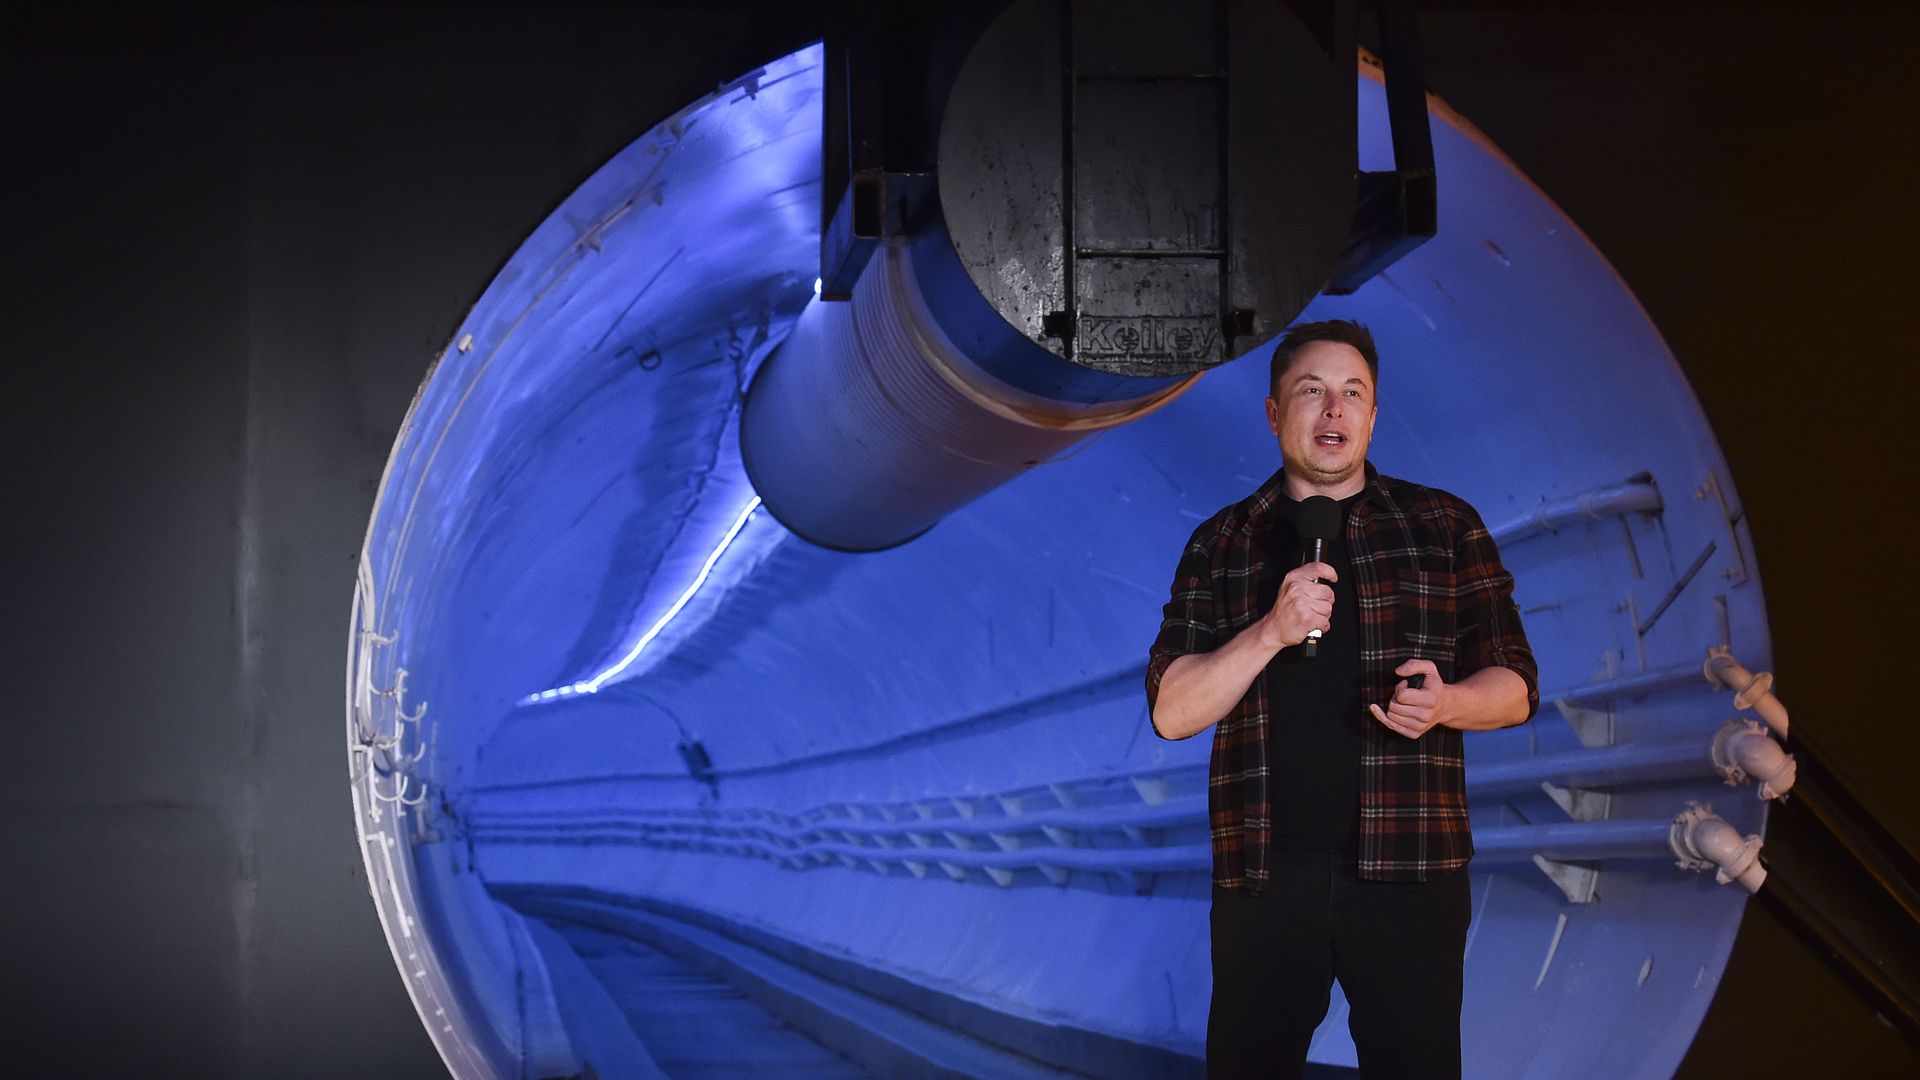 In this image, Elon Musk stands and holds a microphone in front of a tunnel opening.